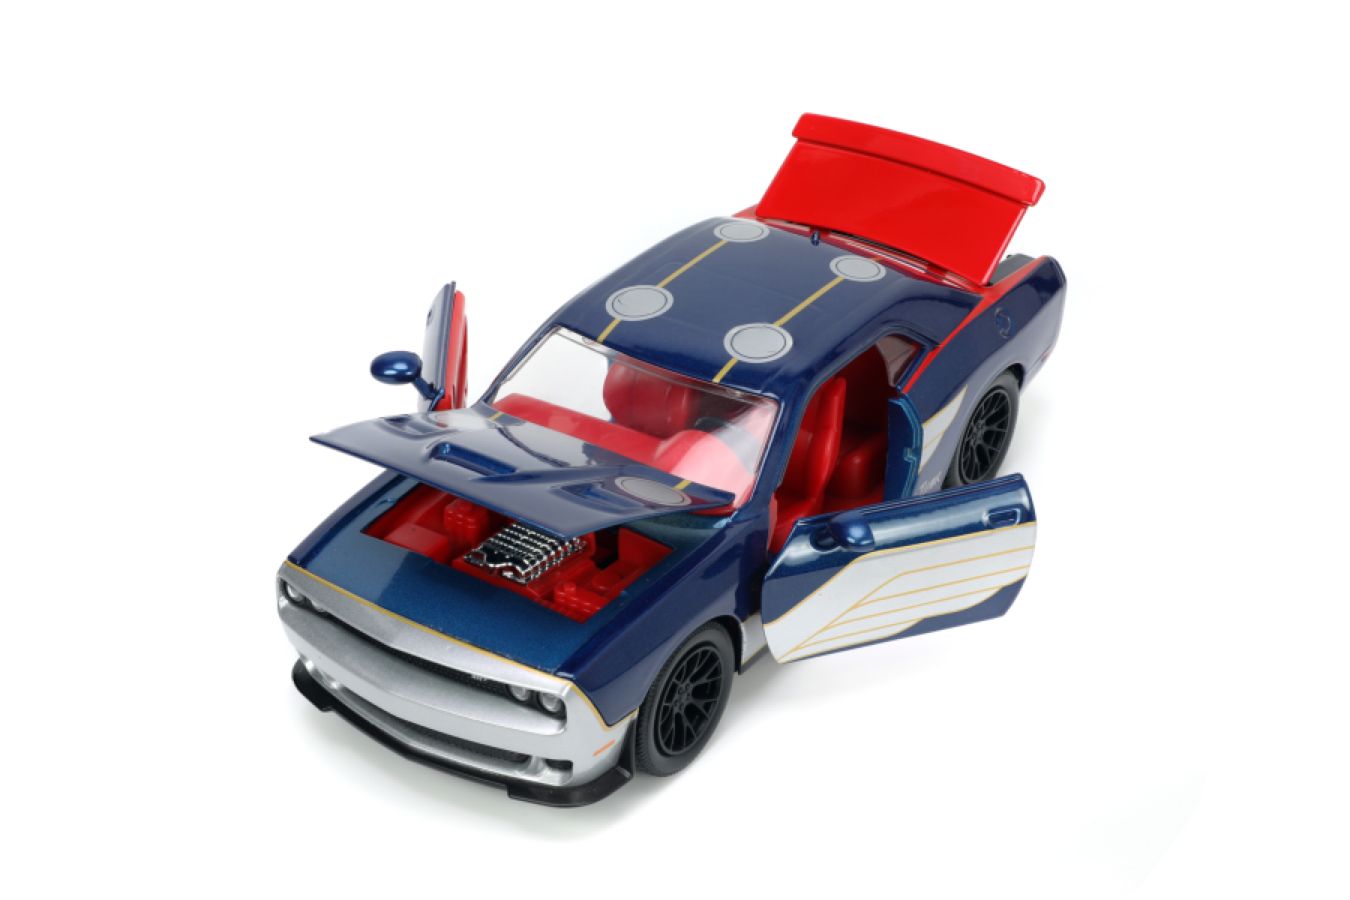 Marvel - 2015 Dodge SRT8 Hellcat 1:24 Scale HR with Thor